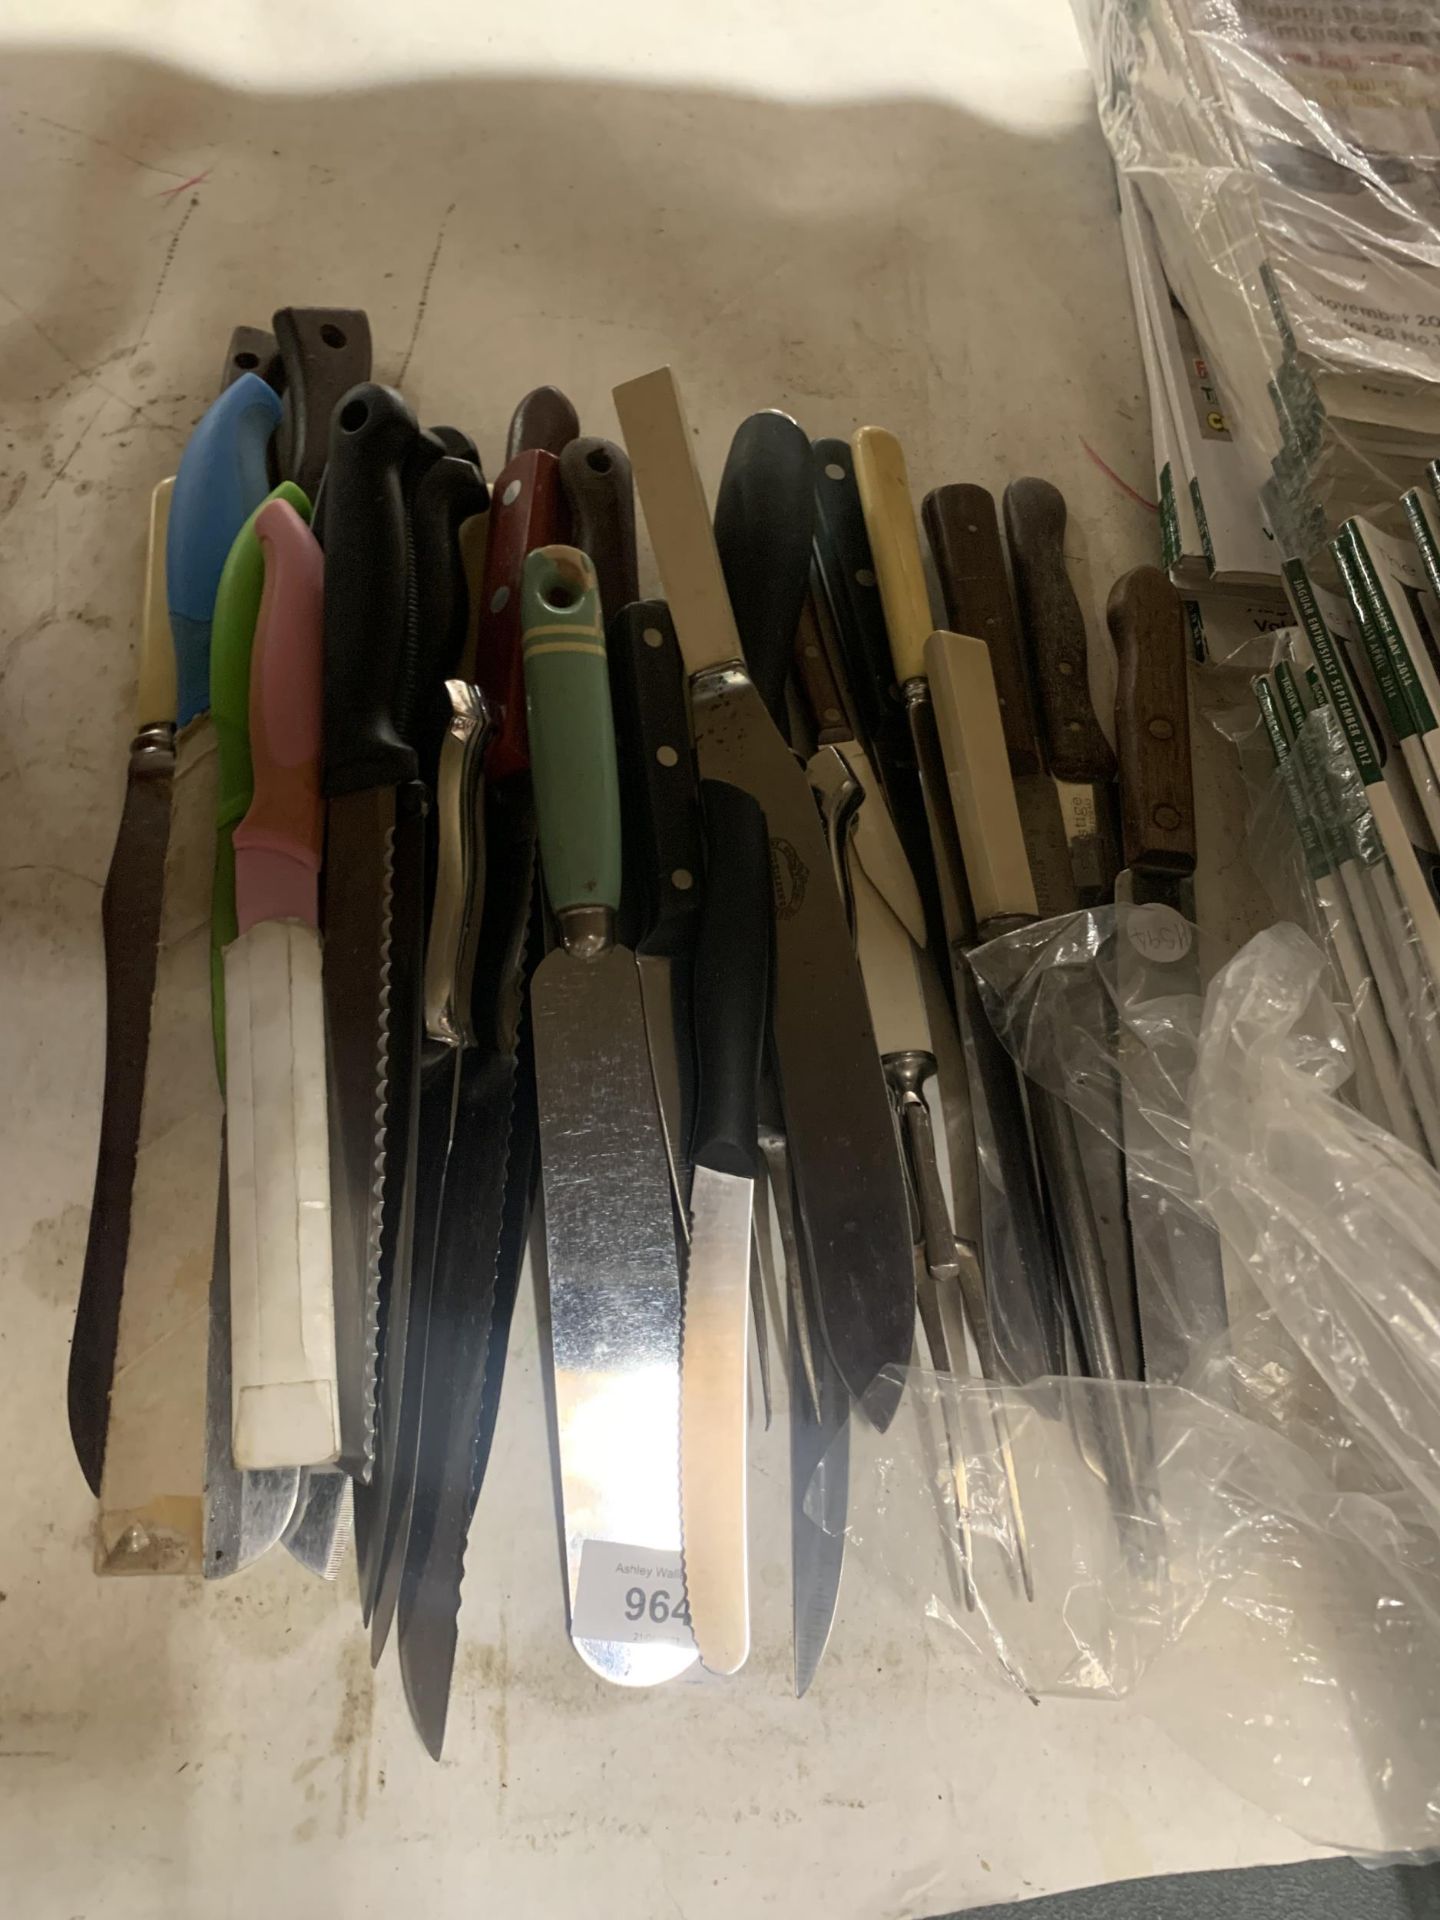 A QUANTITY OF CARVING KNIVES, BREAD KNIVES, SHARPENING STEELS, CARVING FORKS, ETC